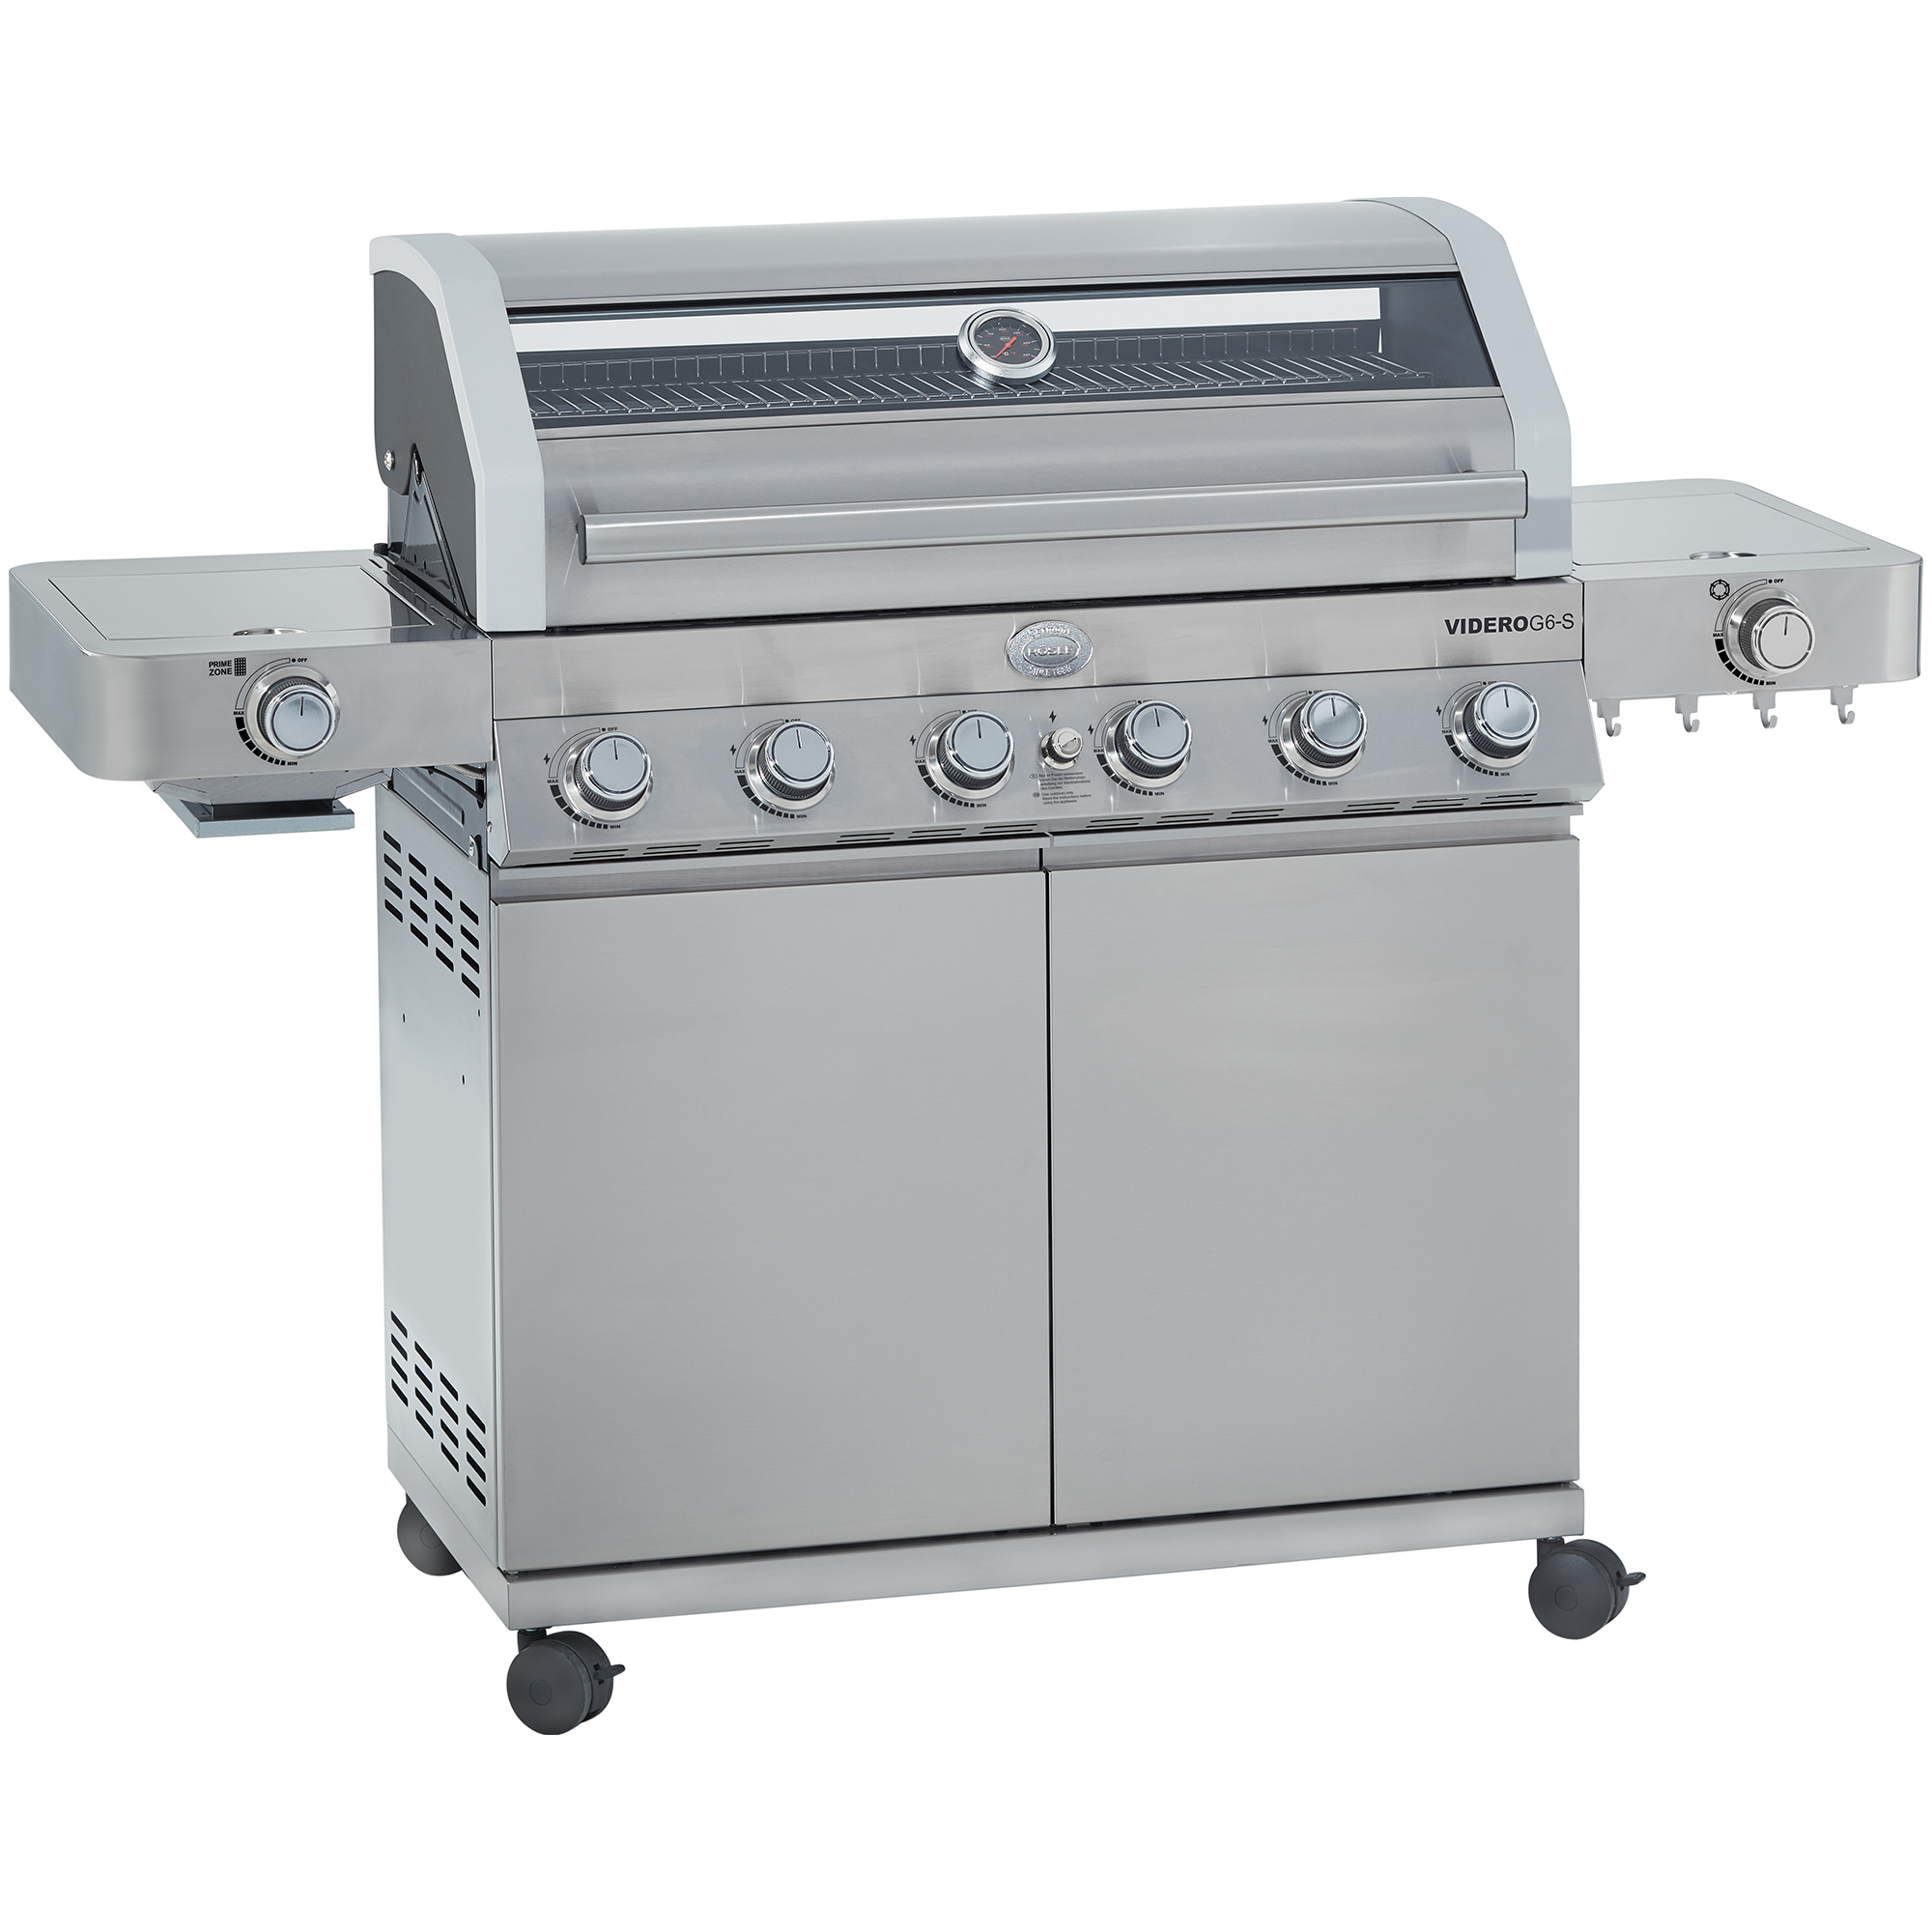 Gas Grill BBQ-Station Videro G6-S Stainless Steel 50 mbar (Model year until 2020)